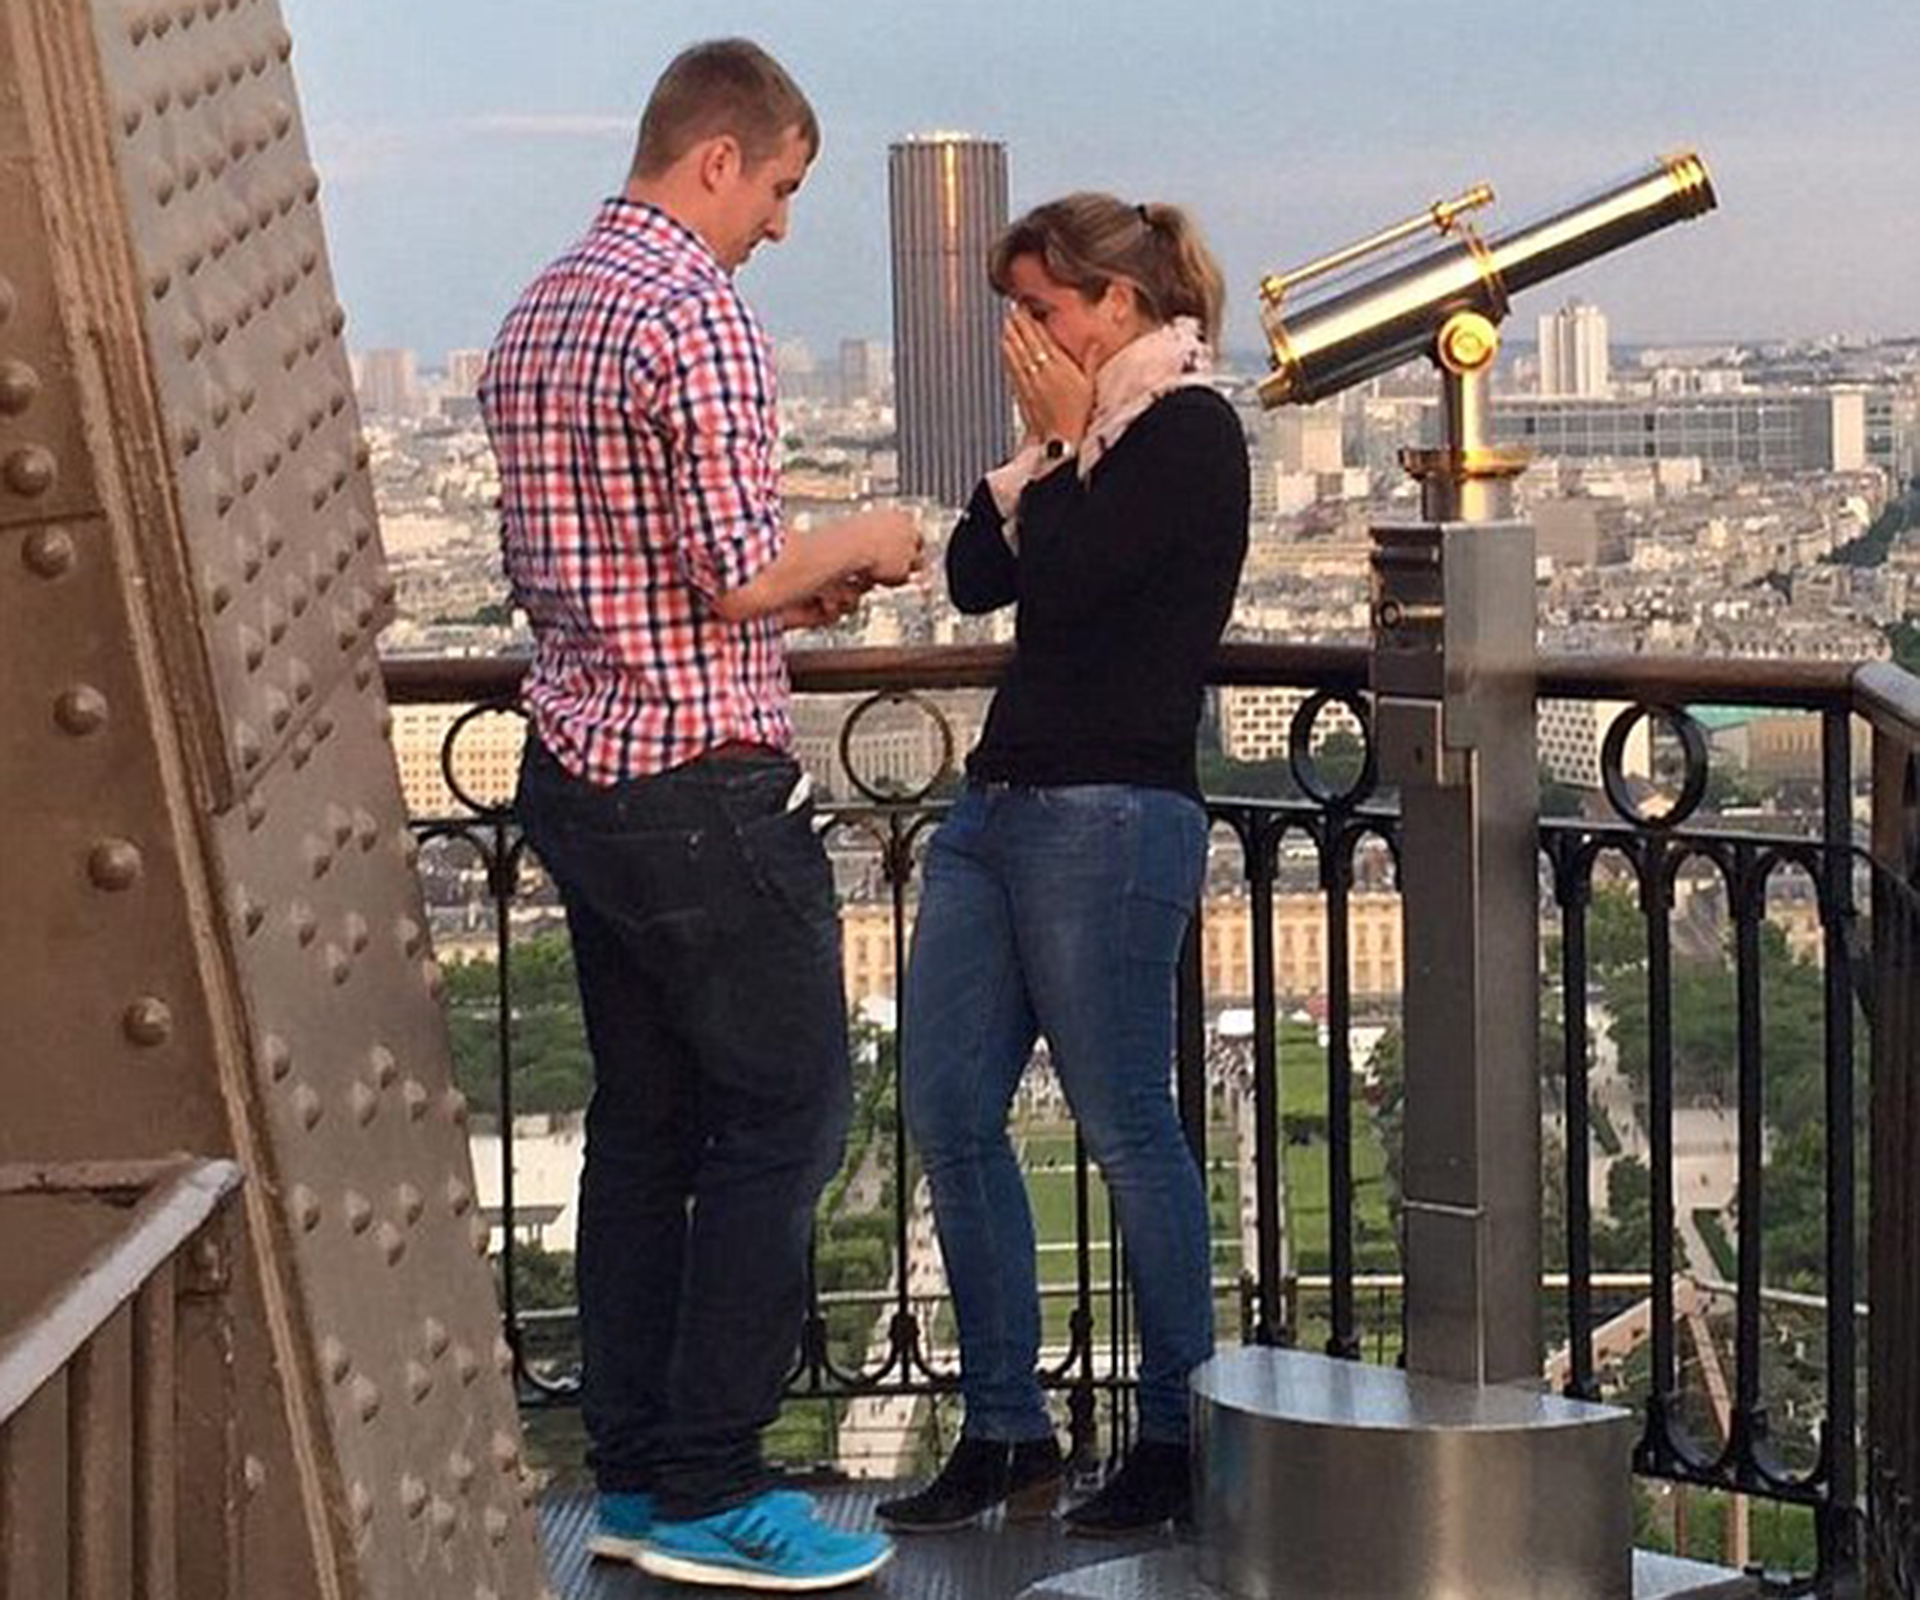 Do you know this newly engaged couple?